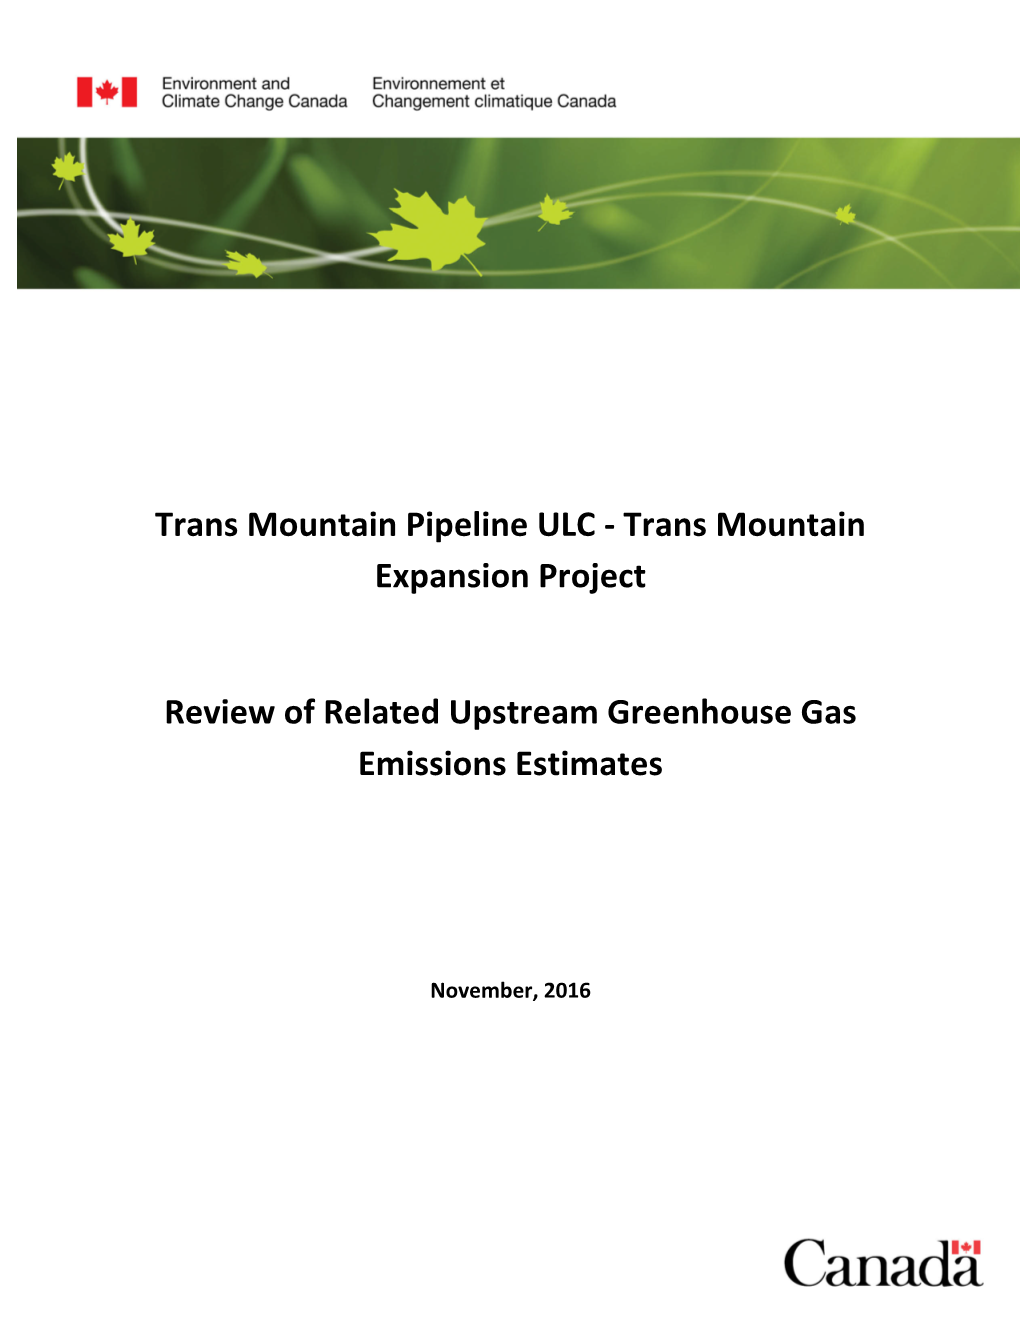 Trans Mountain Pipeline ULC - Trans Mountain Expansion Project